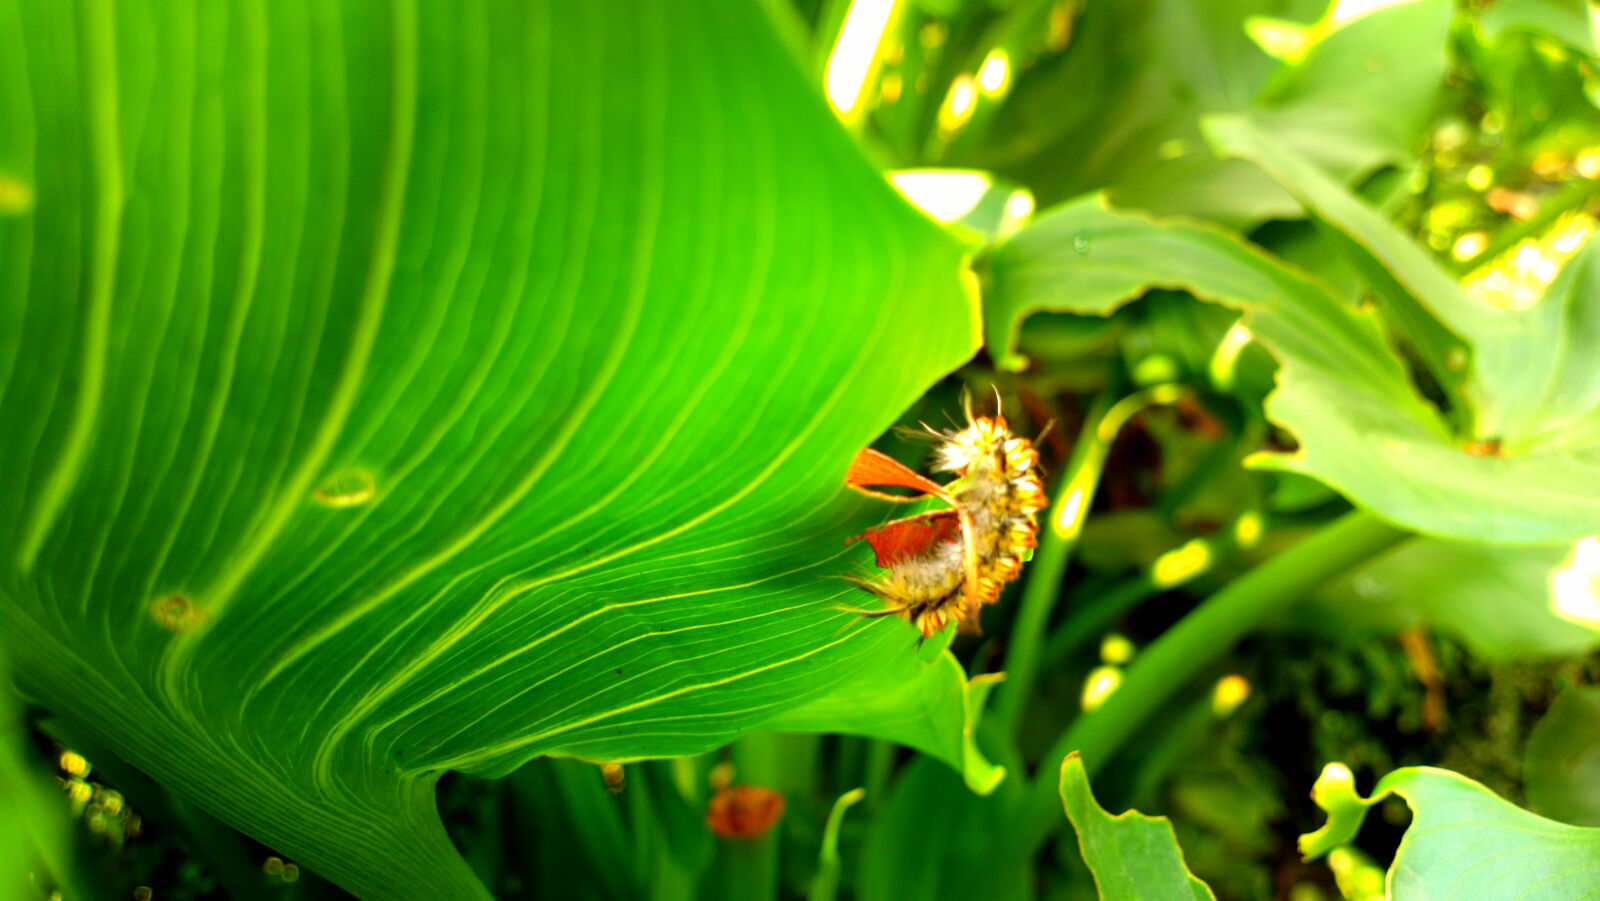 Nokia 808 PureView sample photo. Green, insect, nature photography